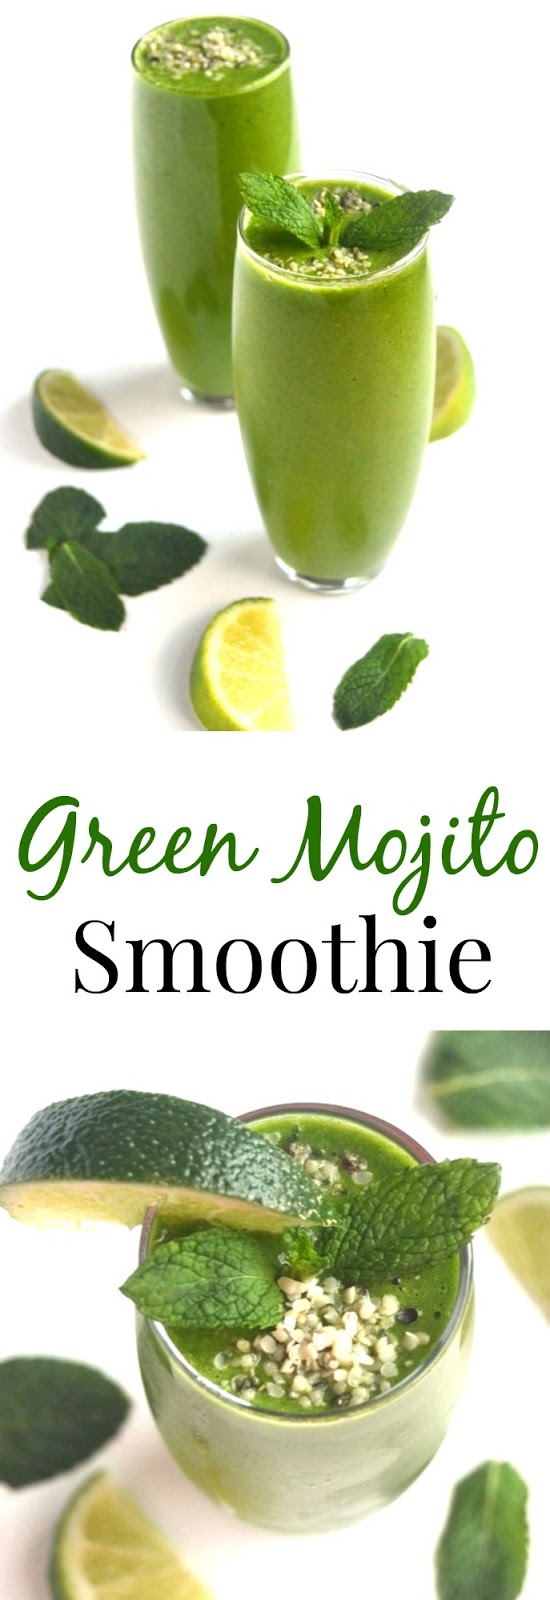 Green Mojito Smoothies are the most refreshing smoothies you will ever have and are loaded with flavorful ingredients including pineapple, fresh mint, lime and fresh ginger! www.nutritionistreviews.com